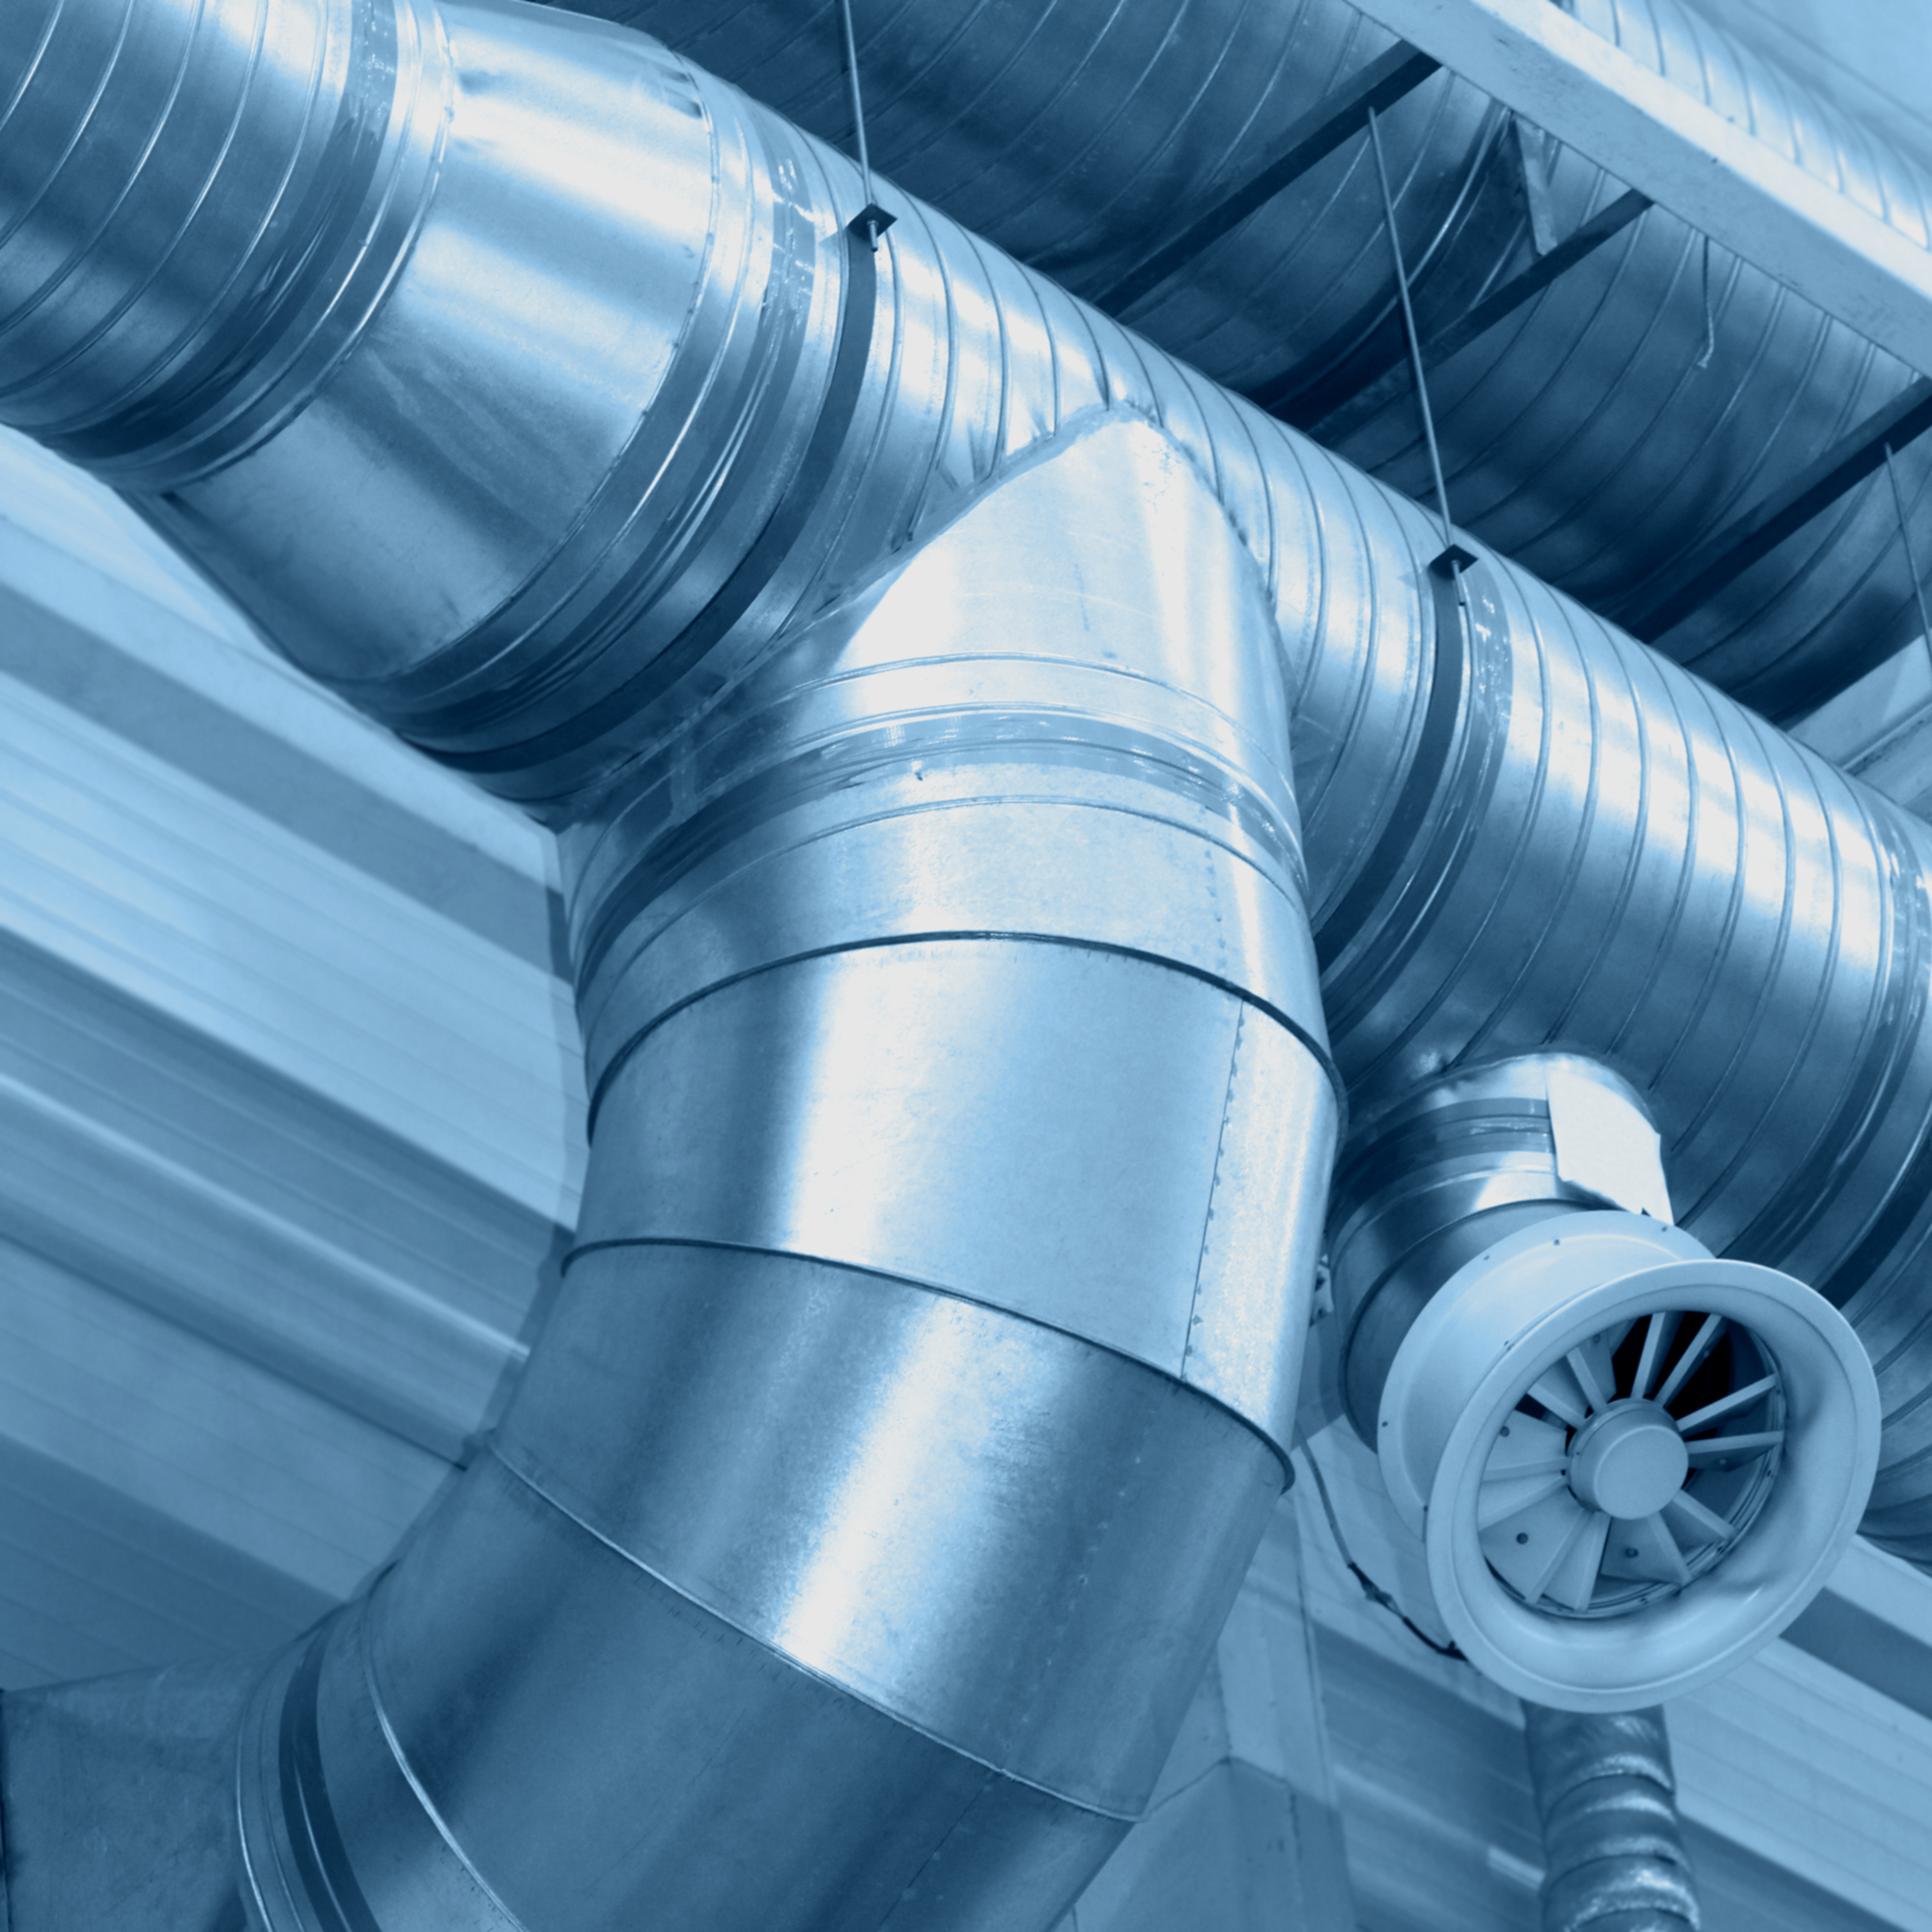 System of ventilating pipes to represent the HVAC manufacturer rep industry